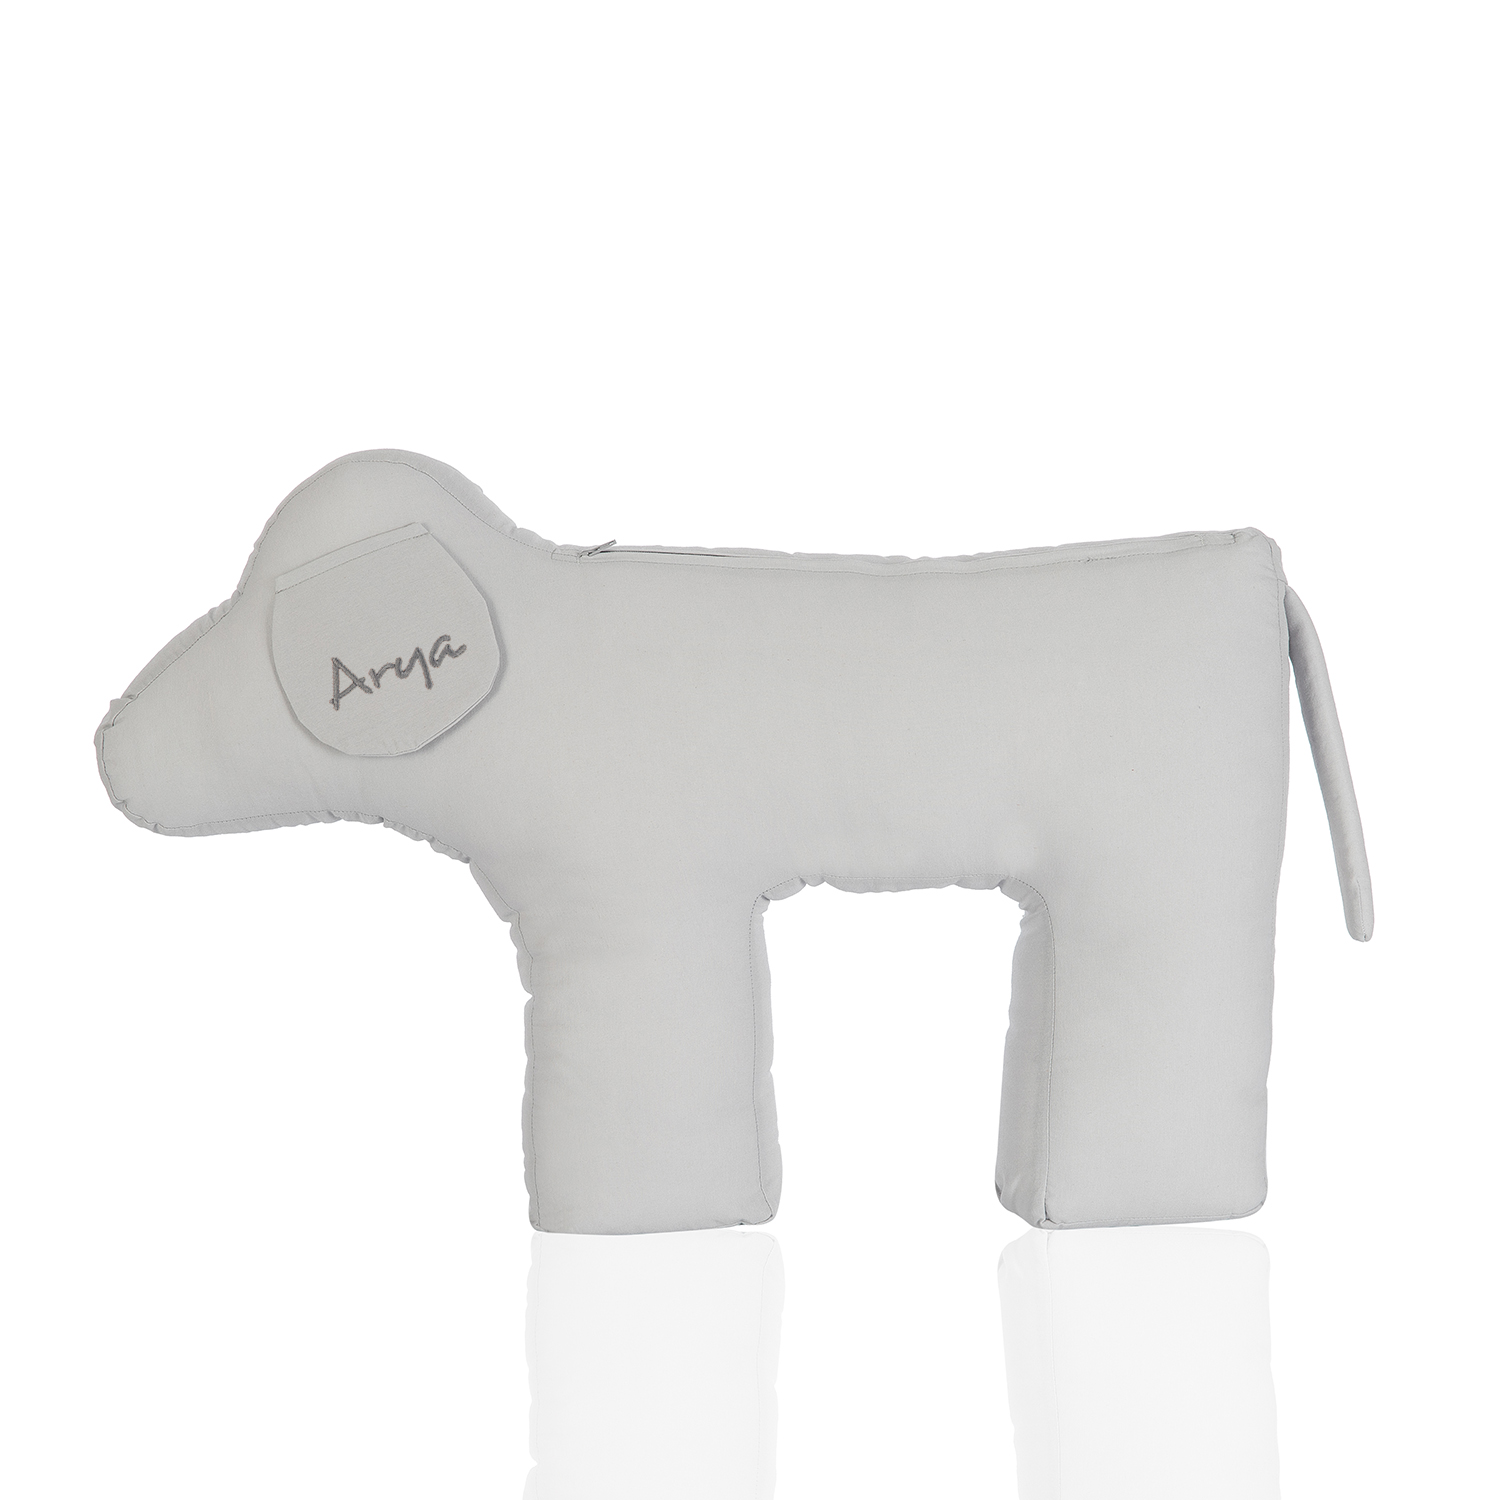 Doggy-Personalized-Nursing-Pillow-Grey-1.png